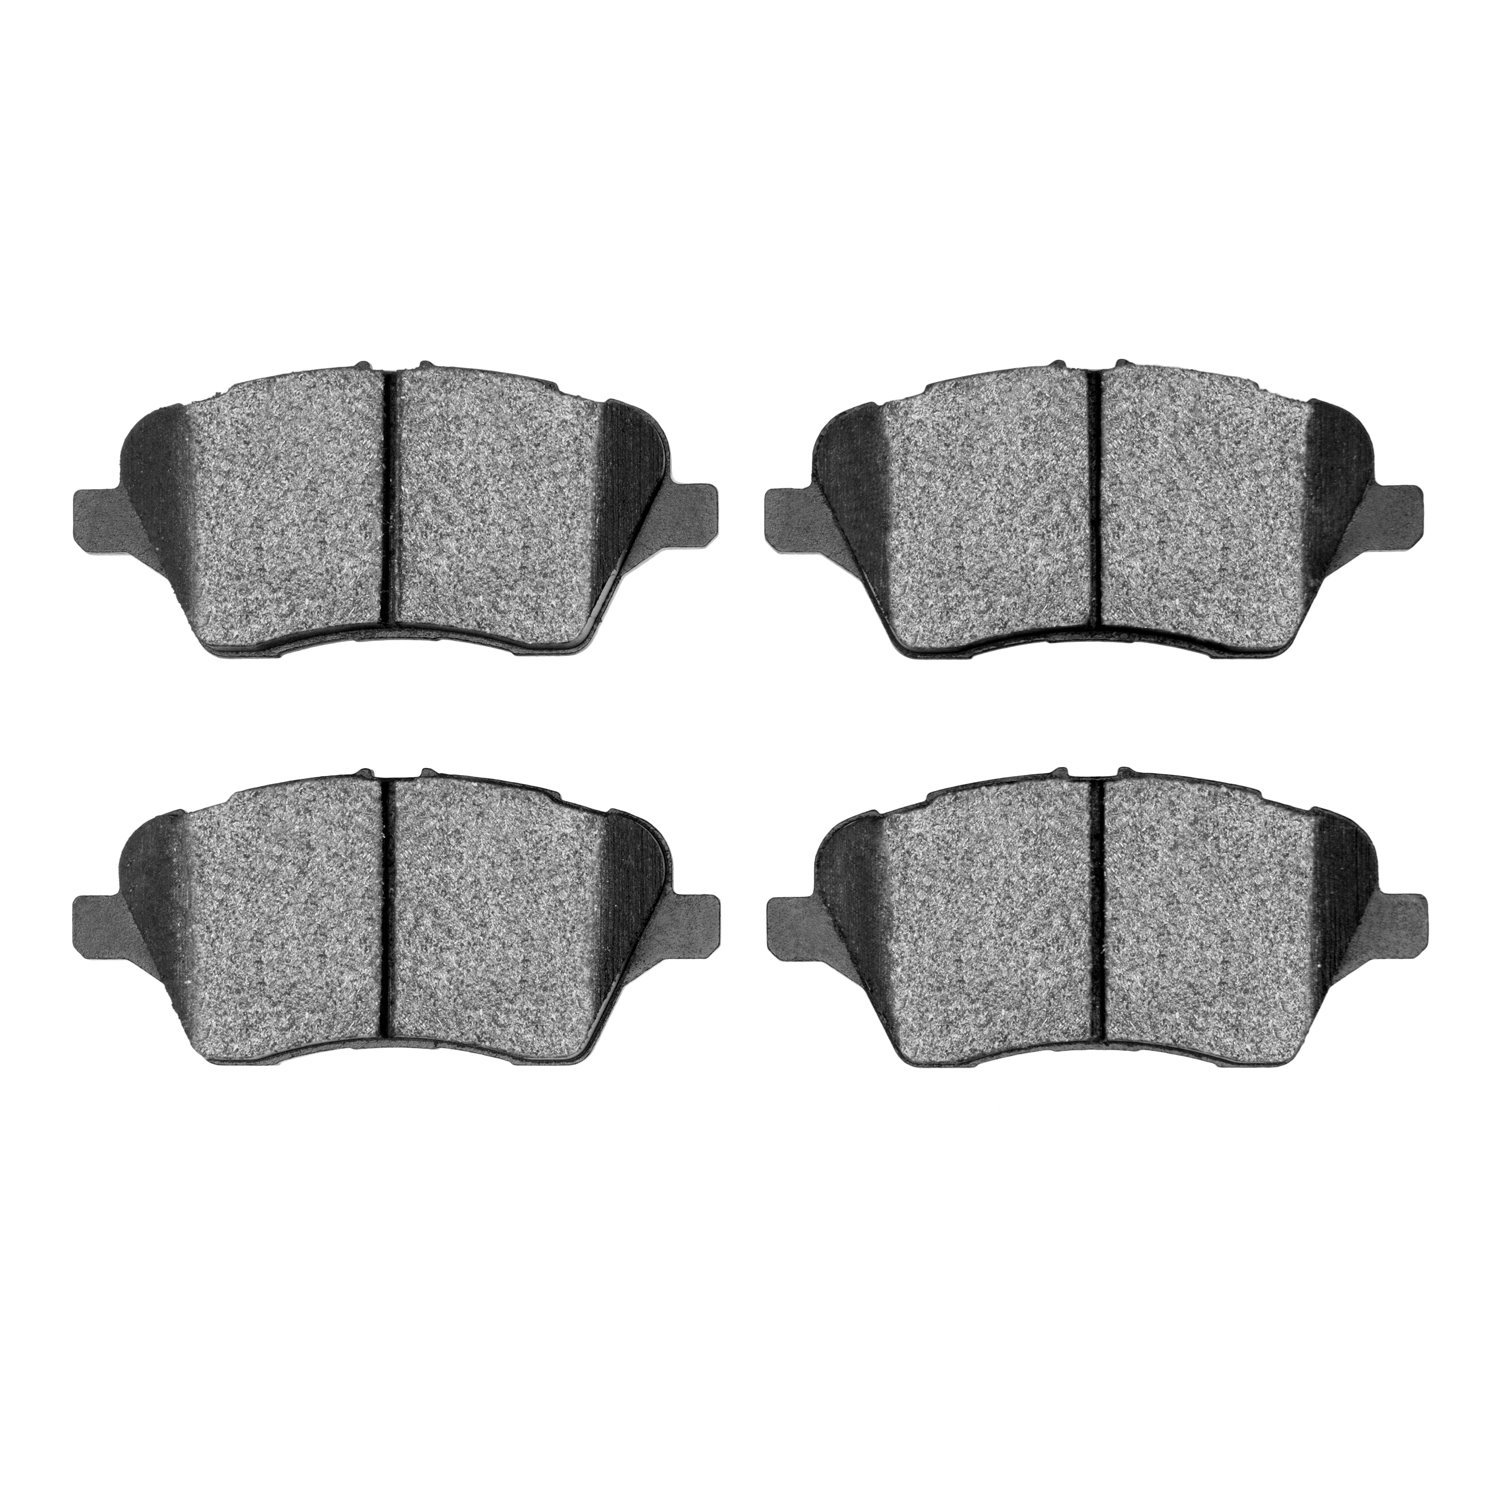 1310-1730-00 3000-Series Ceramic Brake Pads, 2014-2019 Ford/Lincoln/Mercury/Mazda, Position: Front